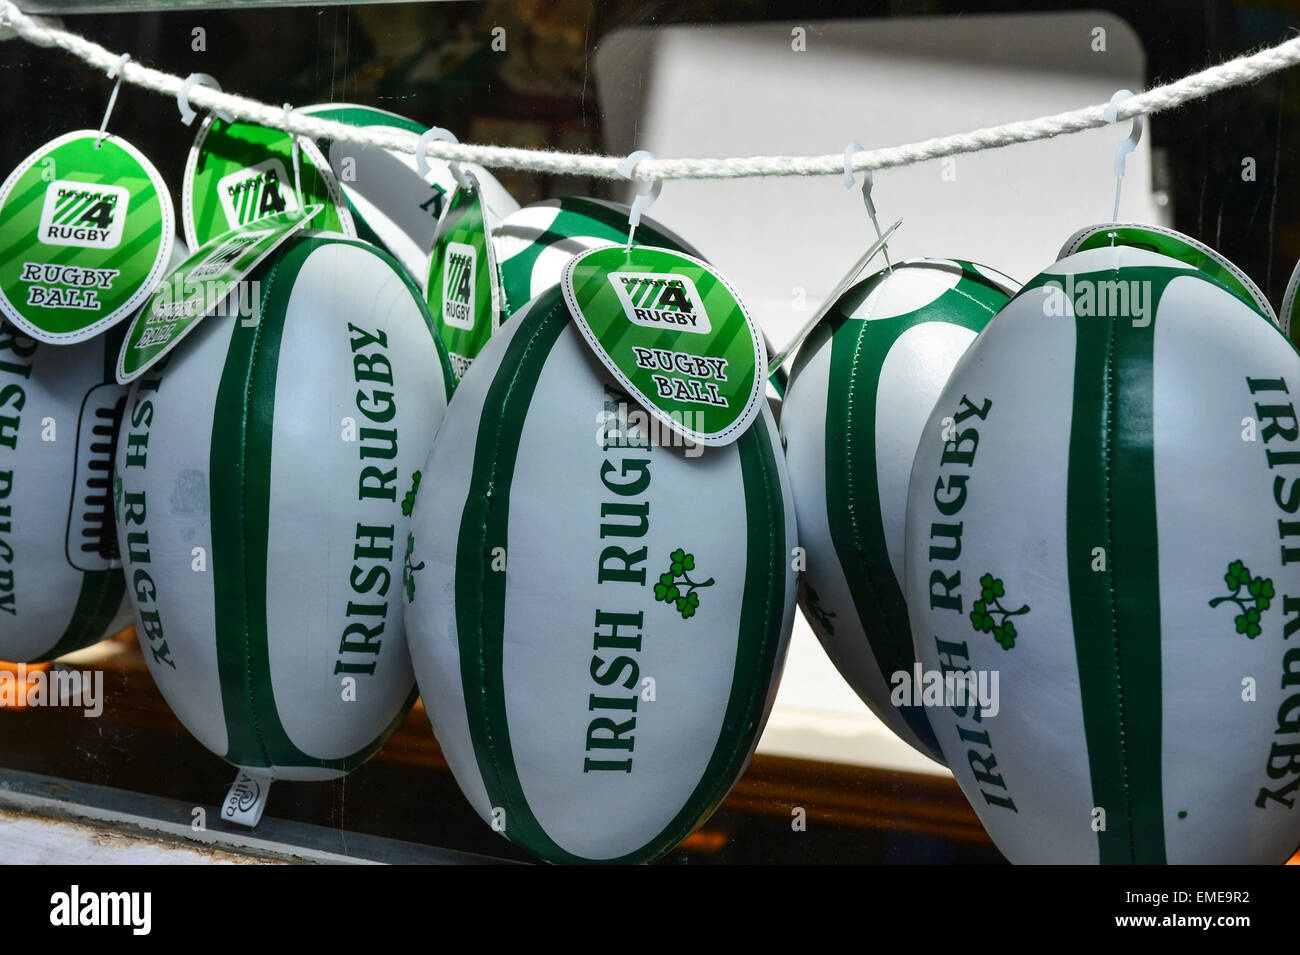 Miniature Irish Rugby balls on sale in a shop window, Londonderry (Derry), Northern Ireland Stock Photo